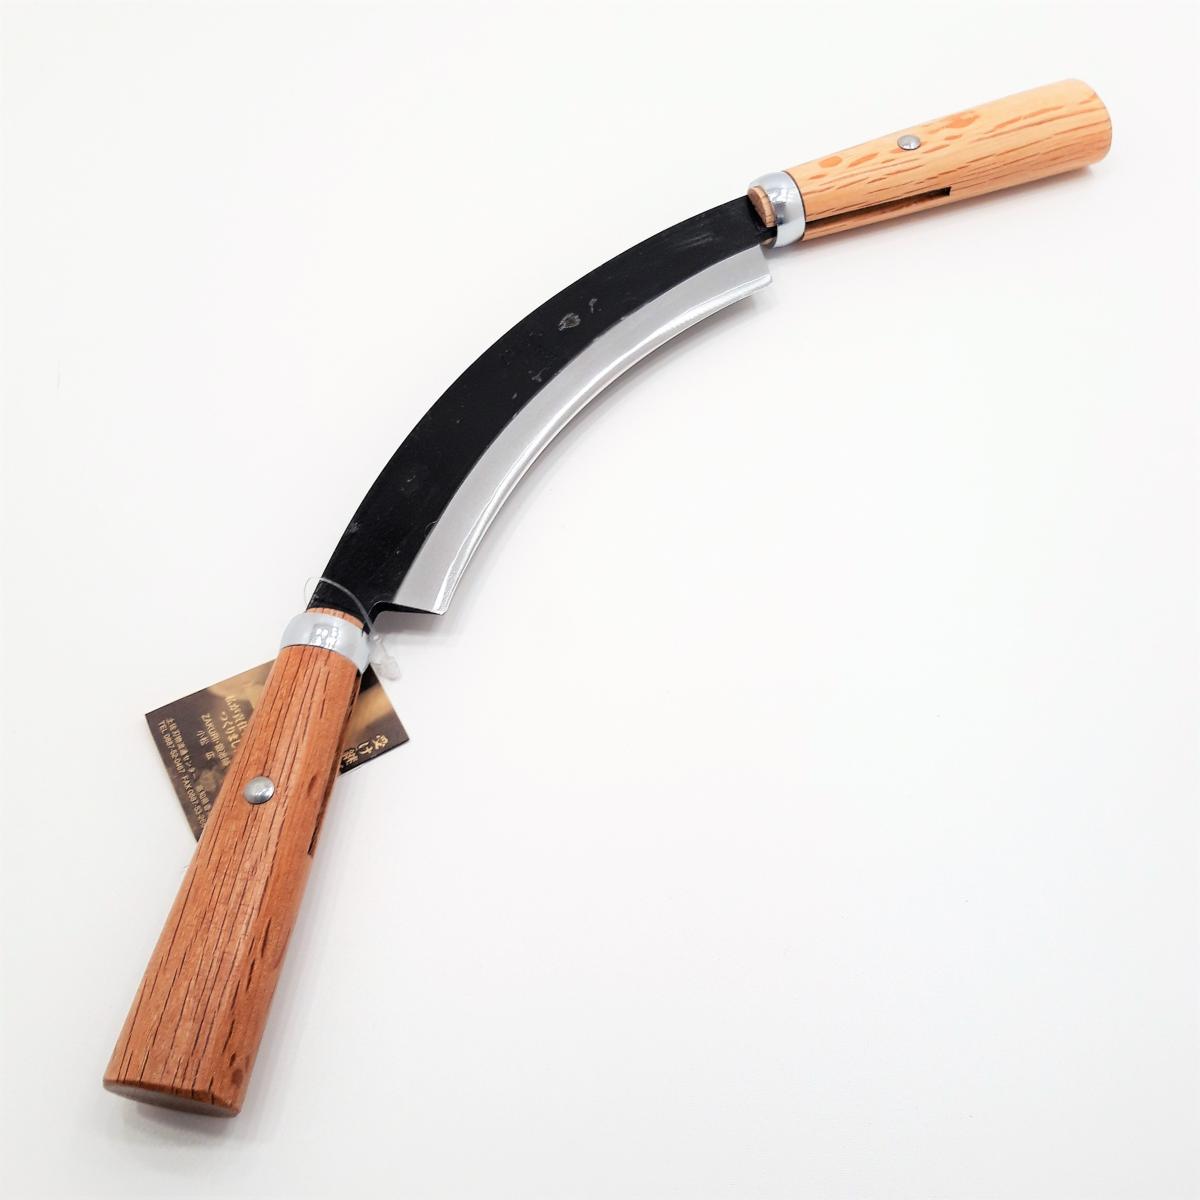 Japanese drawknife with curved blade